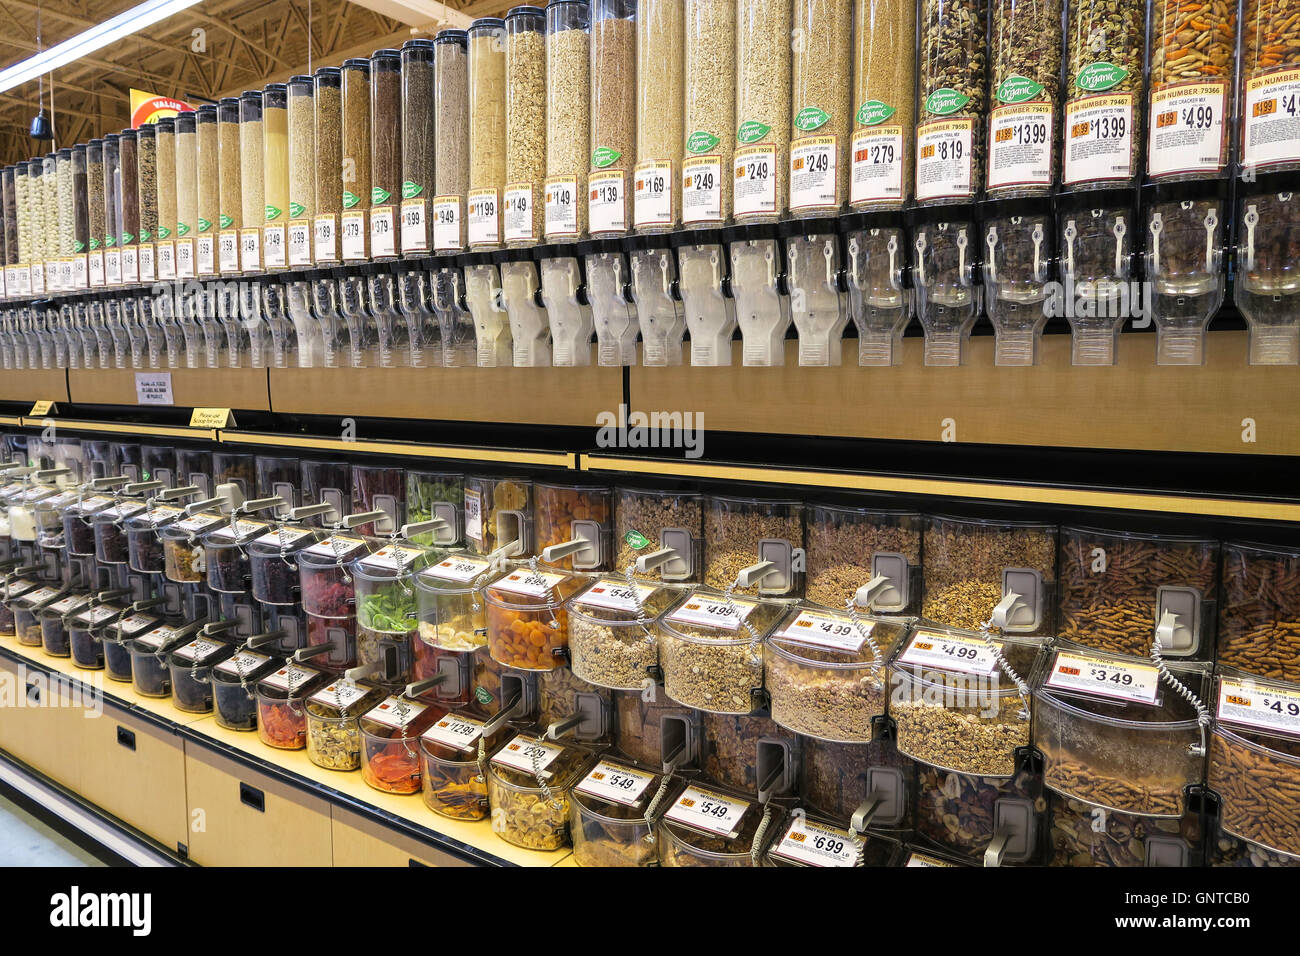 Bulk Products For Sale, Wegmans Grocery Store, Westwood, Massachusetts, USA Stock Photo